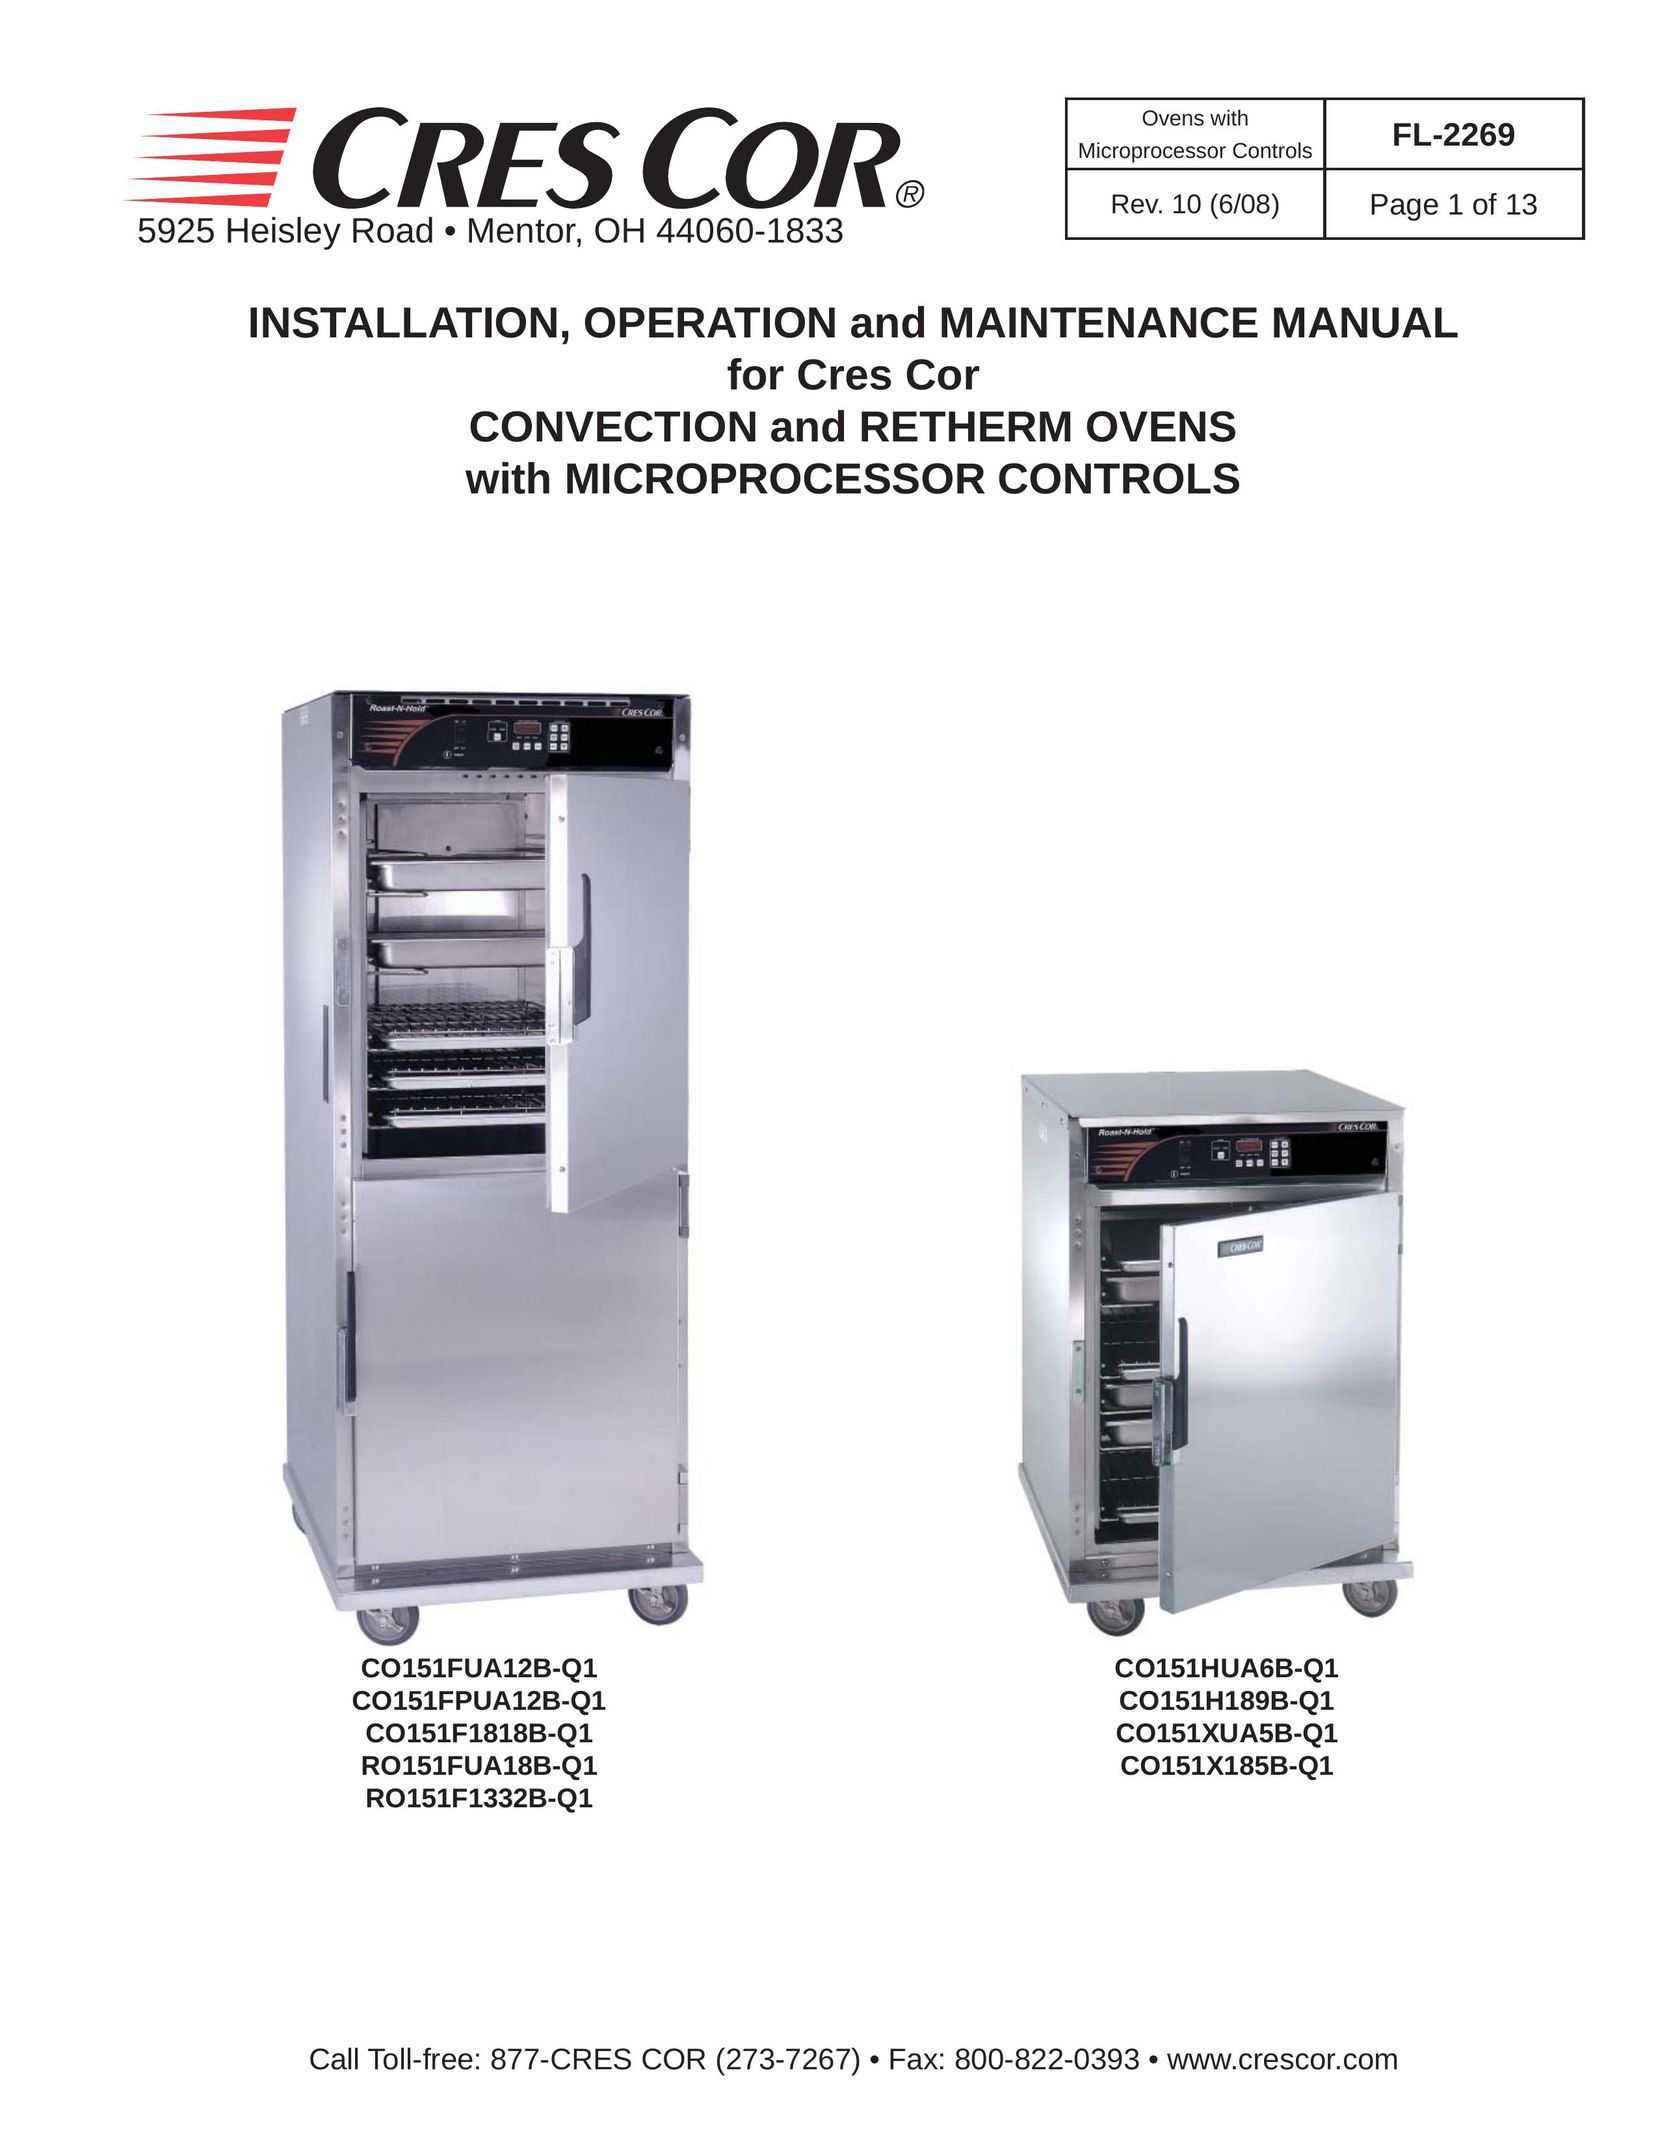 Cres Cor RO151F1332B-Q1 Convection Oven User Manual